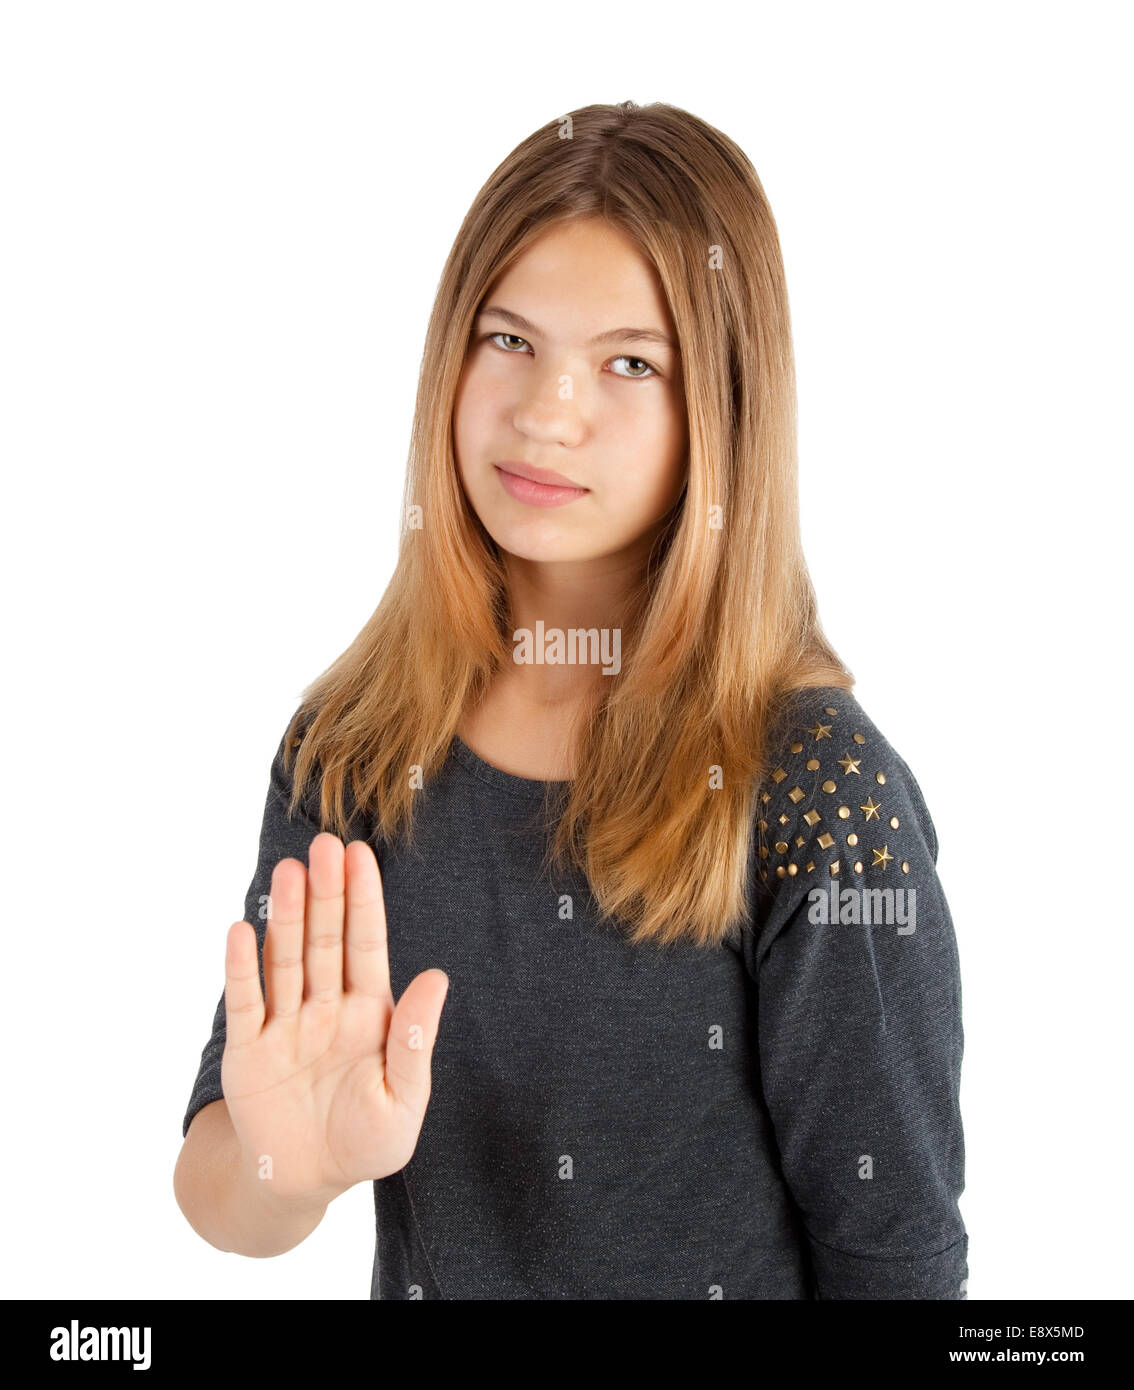 young girl making stop gesture on white background Stock Photo